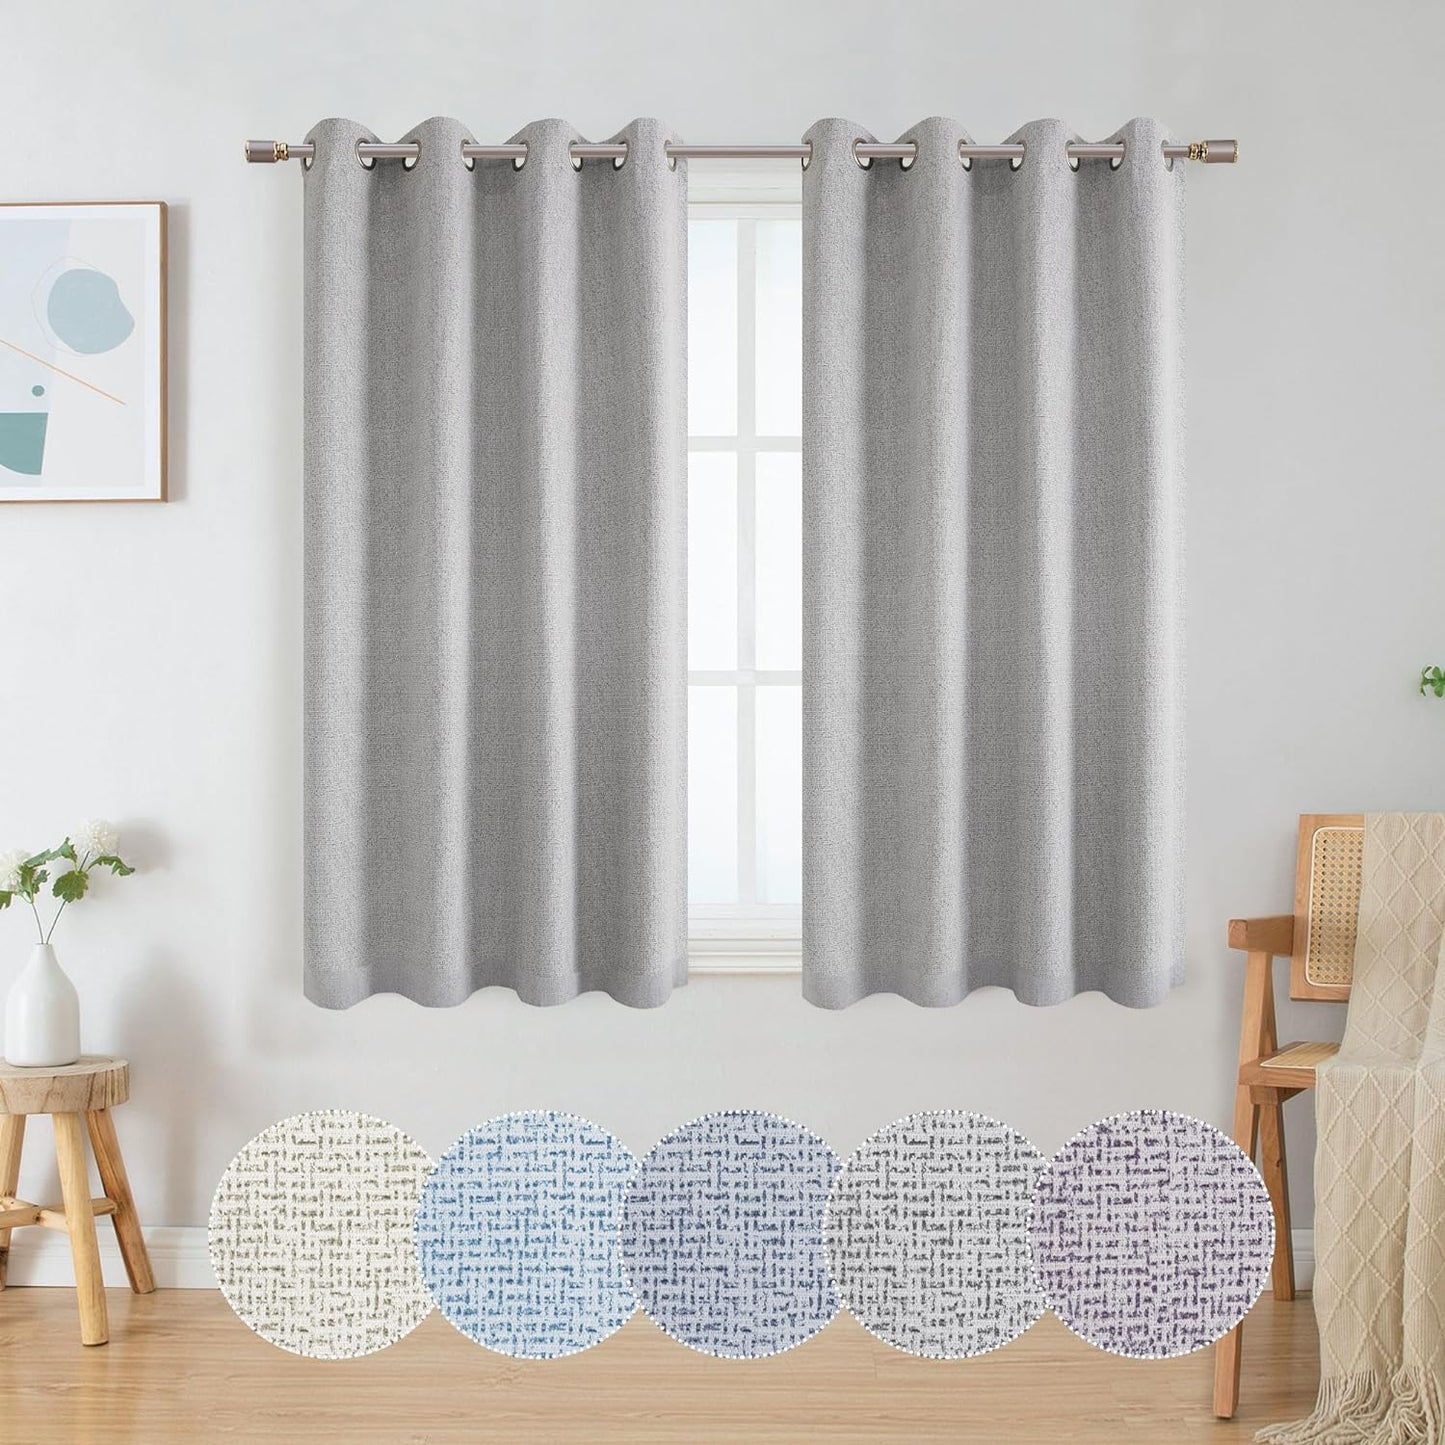 OWENIE Luke Black Out Curtains 63 Inch Long 2 Panels for Bedroom, Geometric Printed Completely Blackout Room Darkening Curtains, Grommet Thermal Insulated Living Room Curtain, 2 PCS, Each 42Wx63L Inch  OWENIE Grey 42"W X 45"L | 2 Pcs 